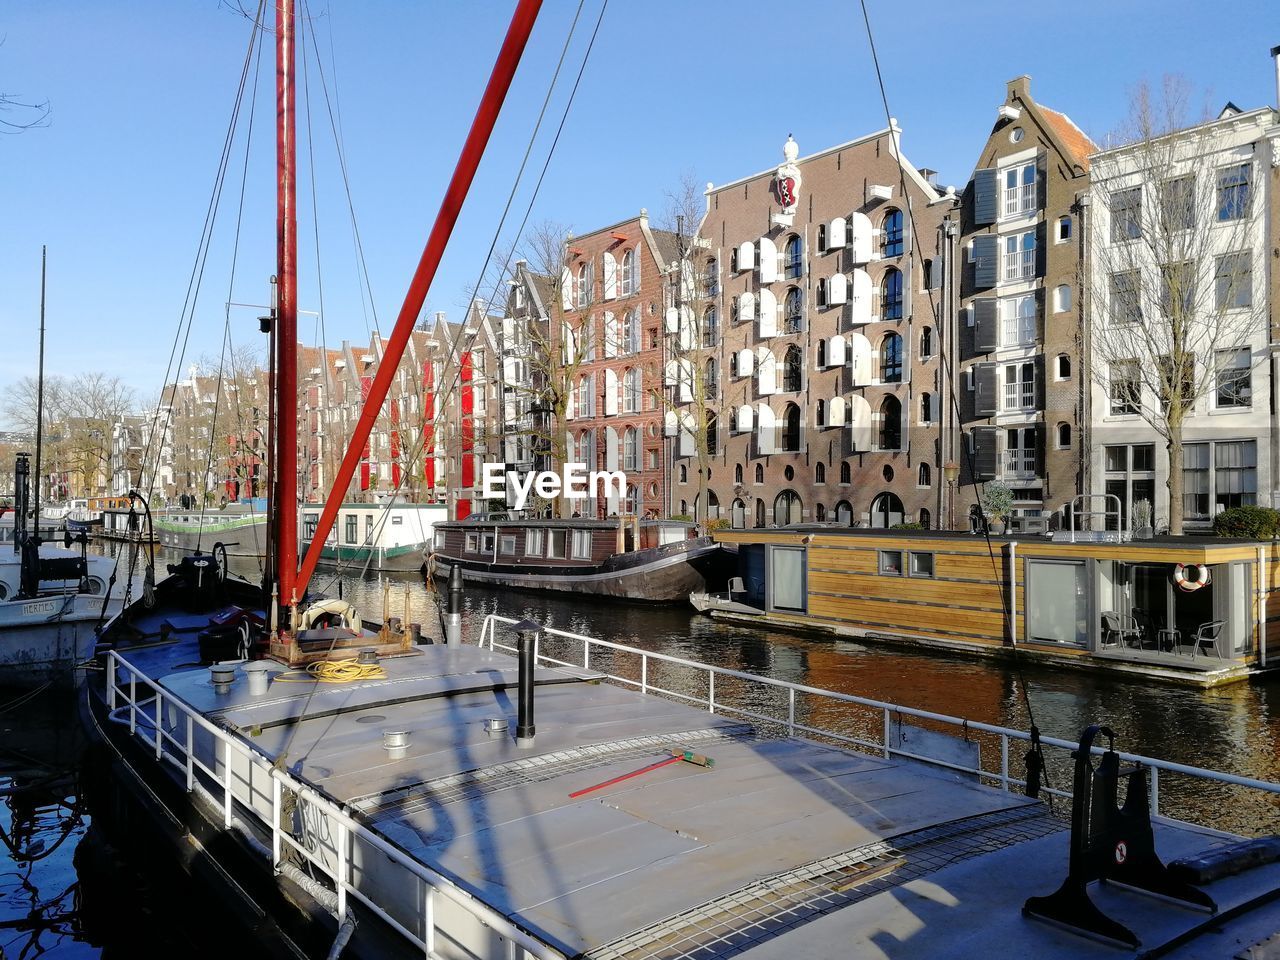 SAILBOATS MOORED ON CANAL BY BUILDINGS AGAINST SKY